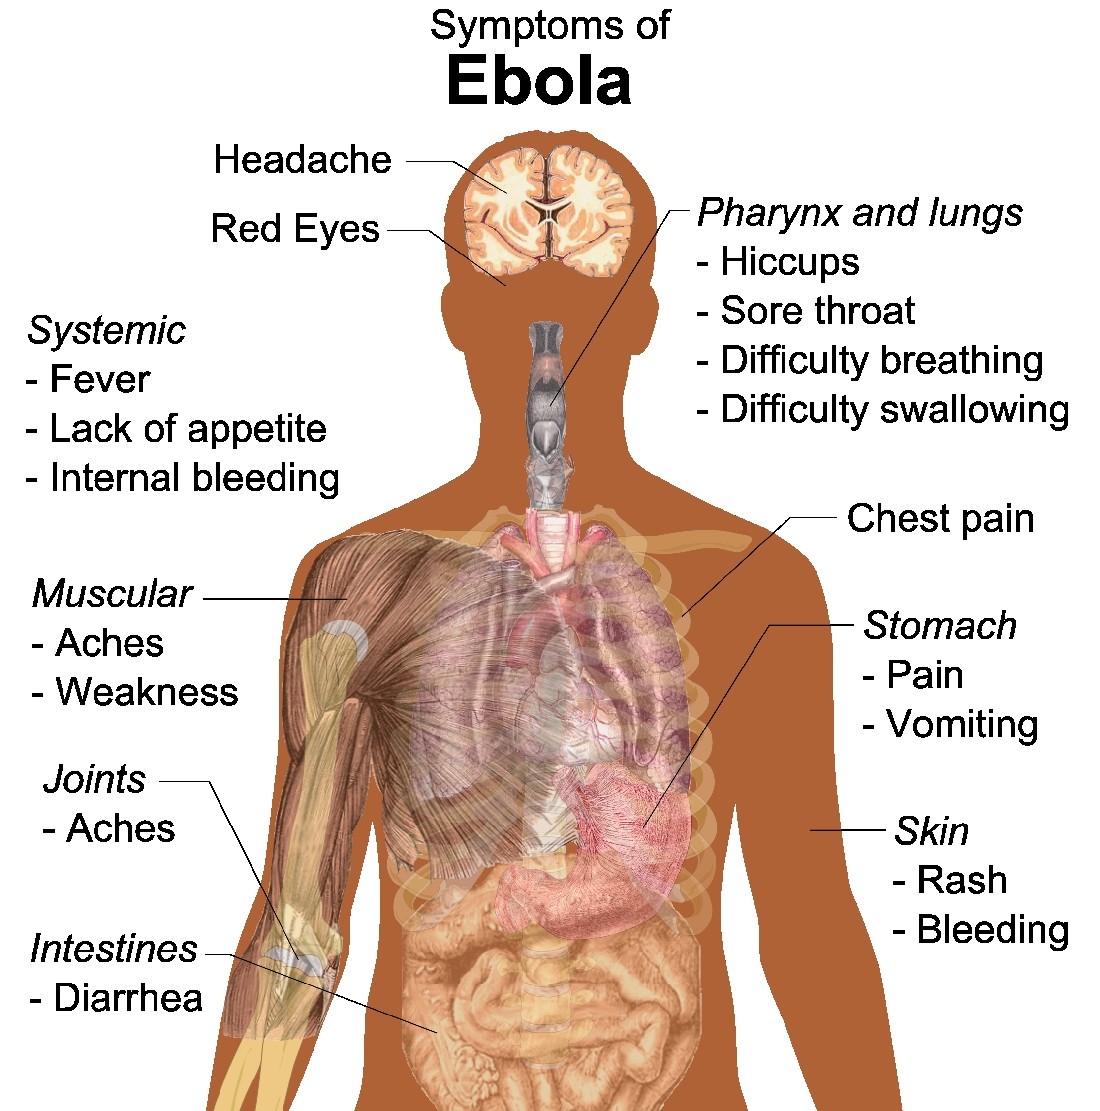 ...that persons with negative Rhesus group generally are infected less and survive more than those with a positive Rhesus group in the event of Ebola exposure, particularly if they are of blood group A. https://pst.cr/JN6Ma